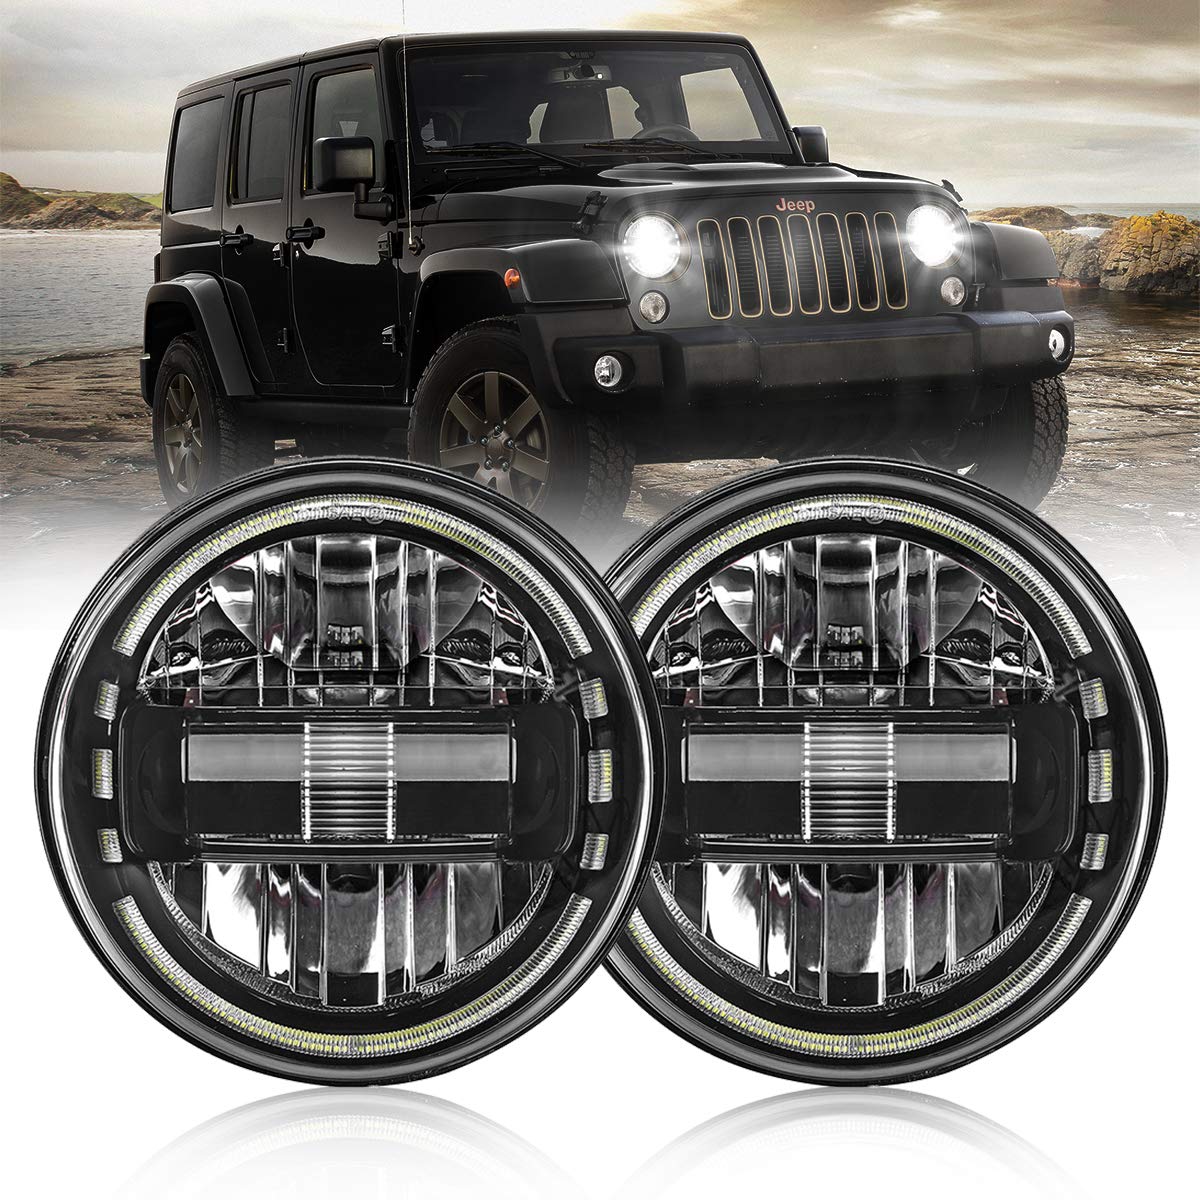 7 Inch Led Headlights with Halo DRL Low Beam and High Beam Plug & Play DOT Approved LED Round Headlight for Jeep Wrangler JK LJ CJ TJ 1997-2018 Headlamps Hummer H1 H2-2021 Chrome 